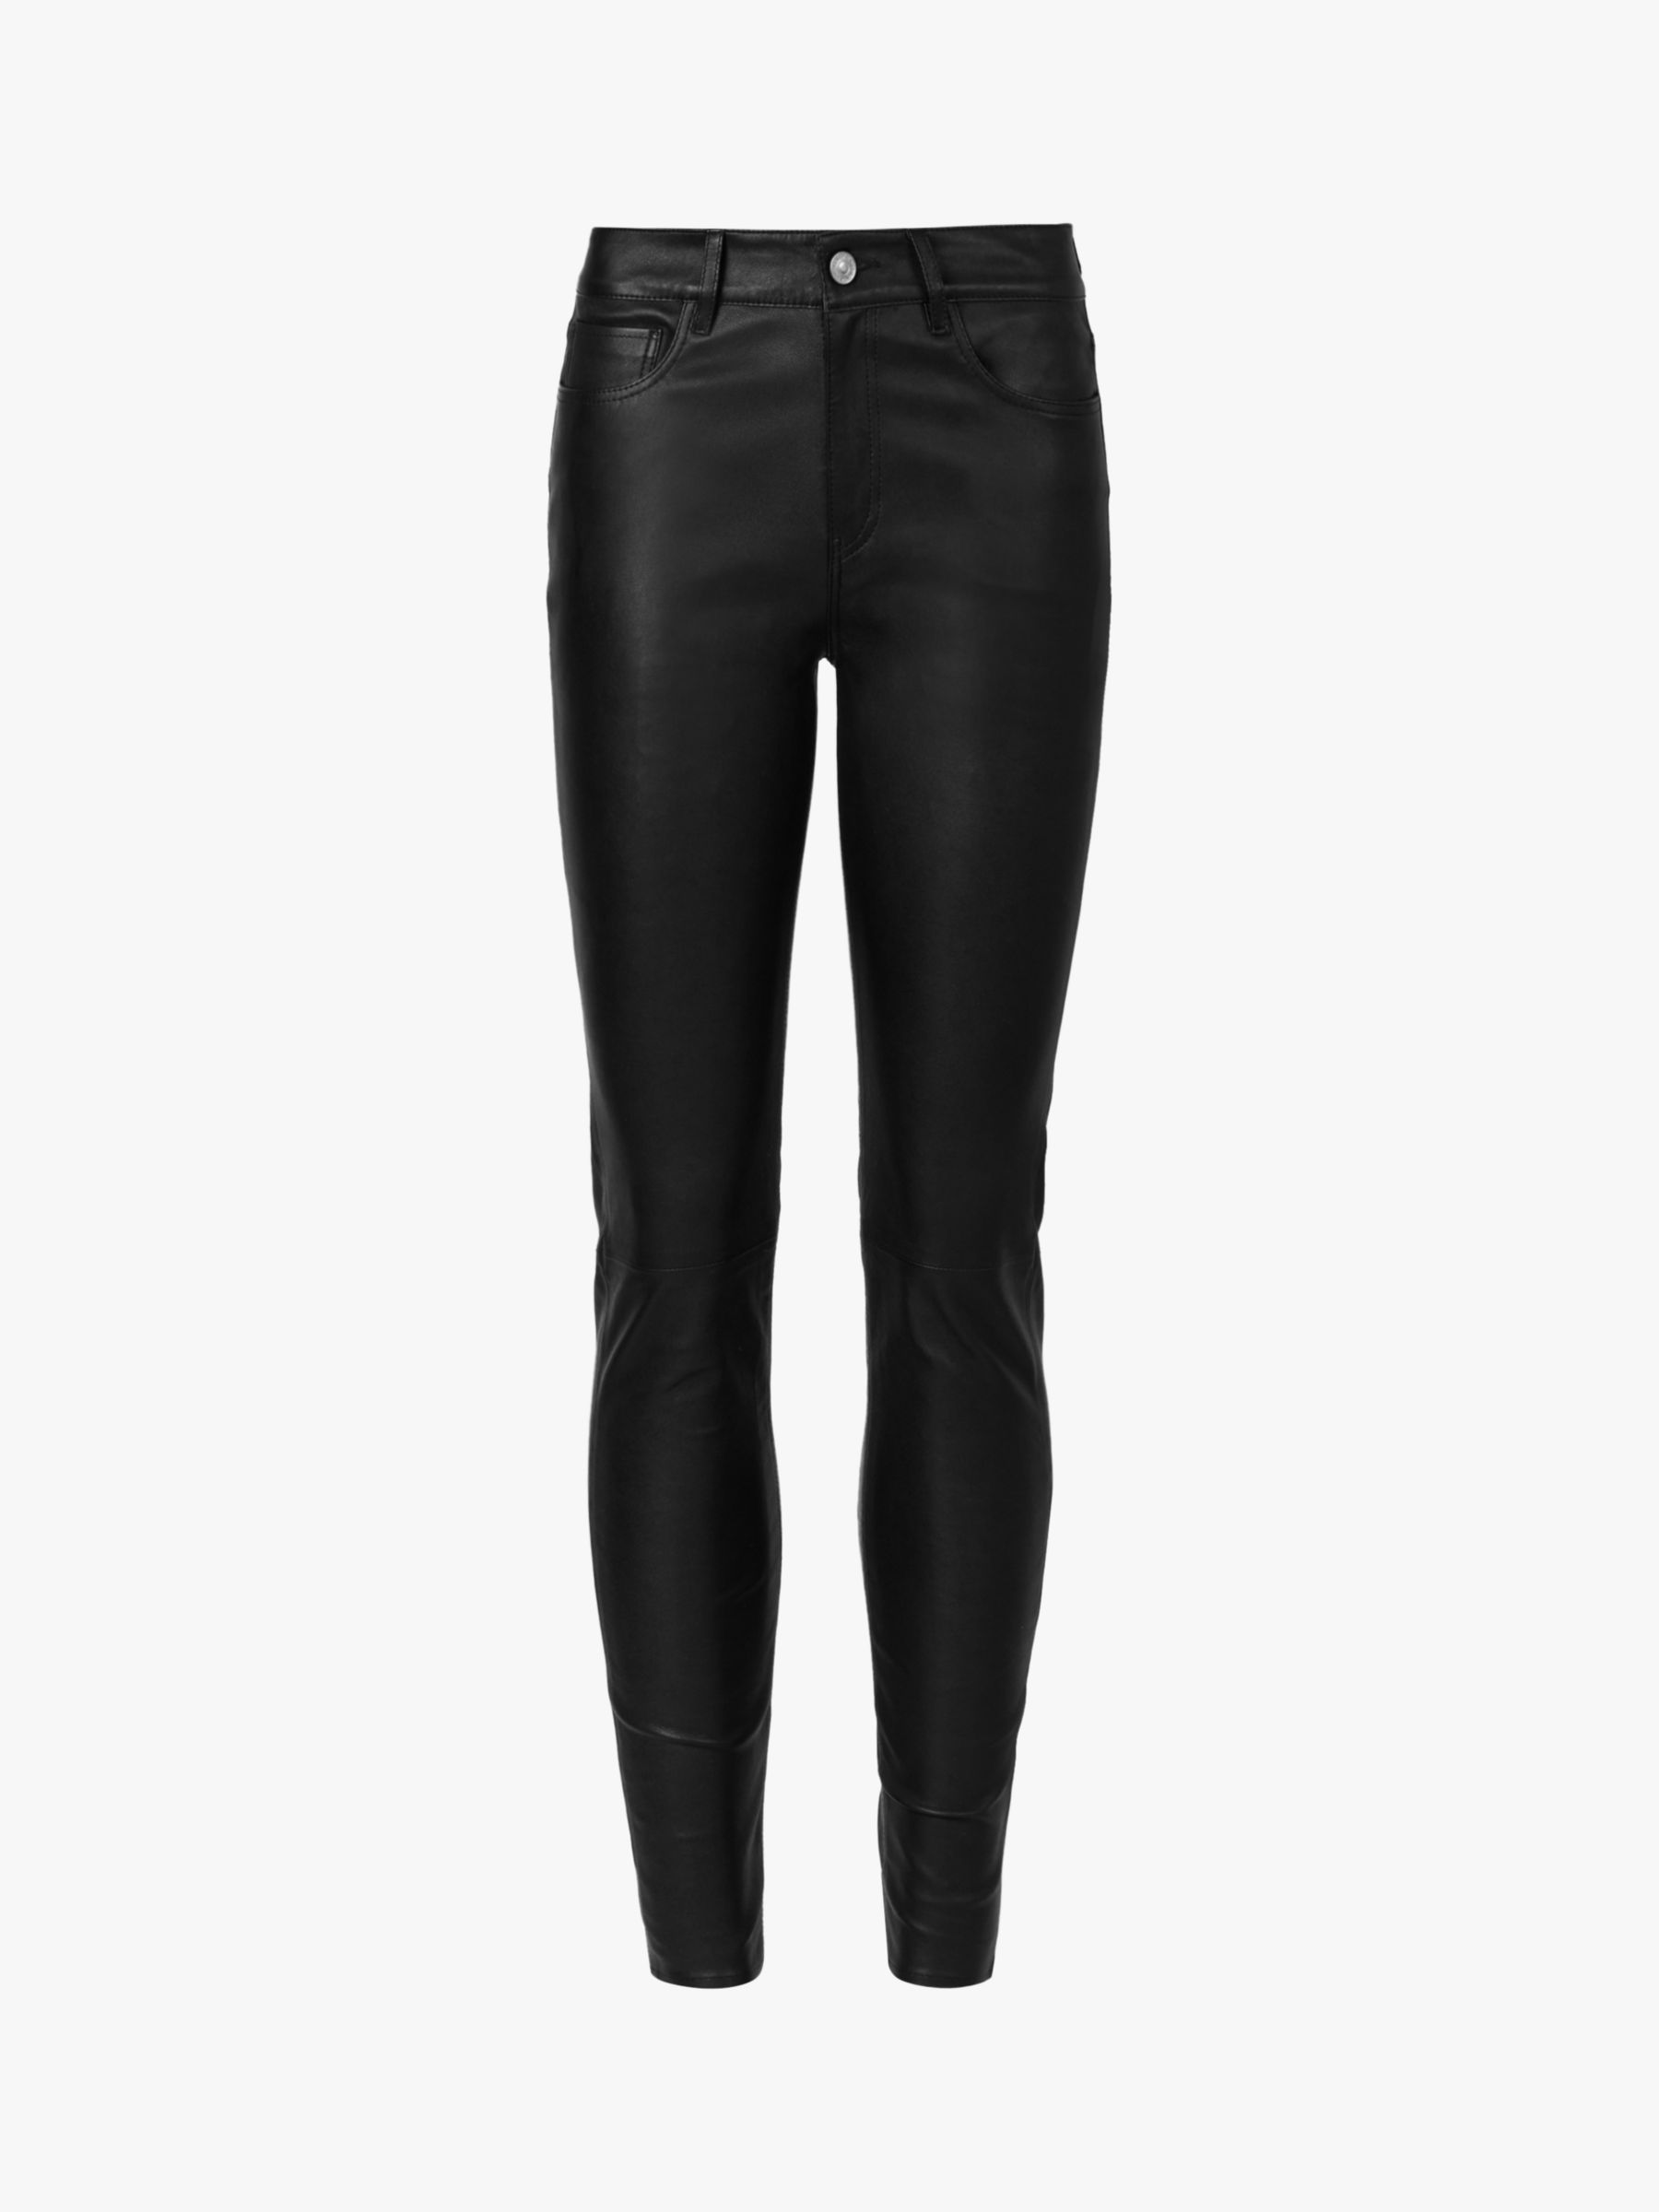 AllSaints Ina Leather Trousers, Black, 6